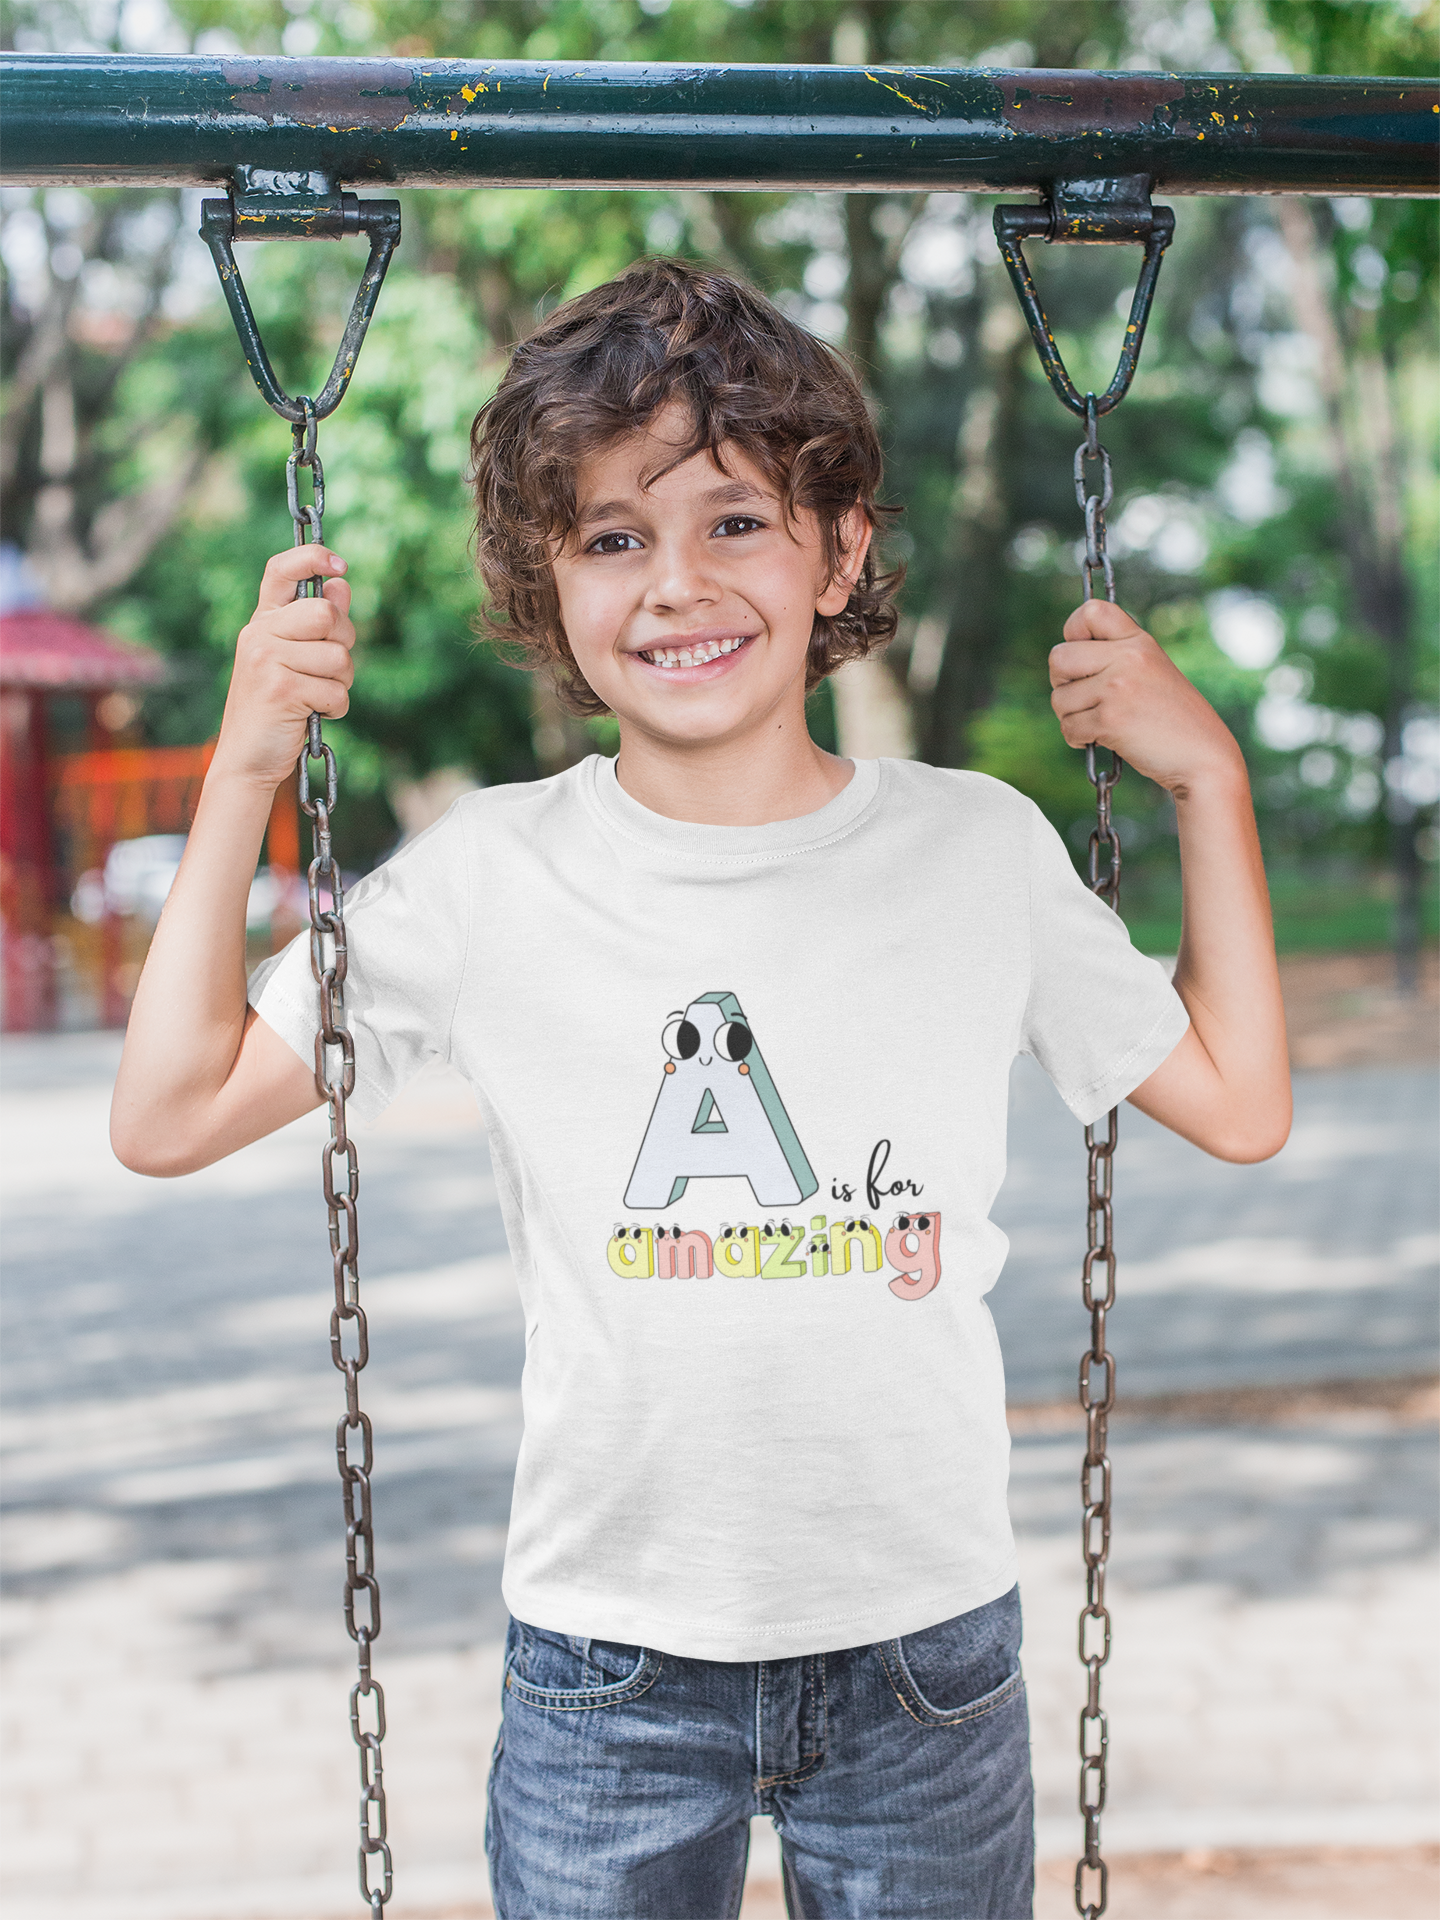 A Is For Amazing - Toddler Short Sleeve Tee